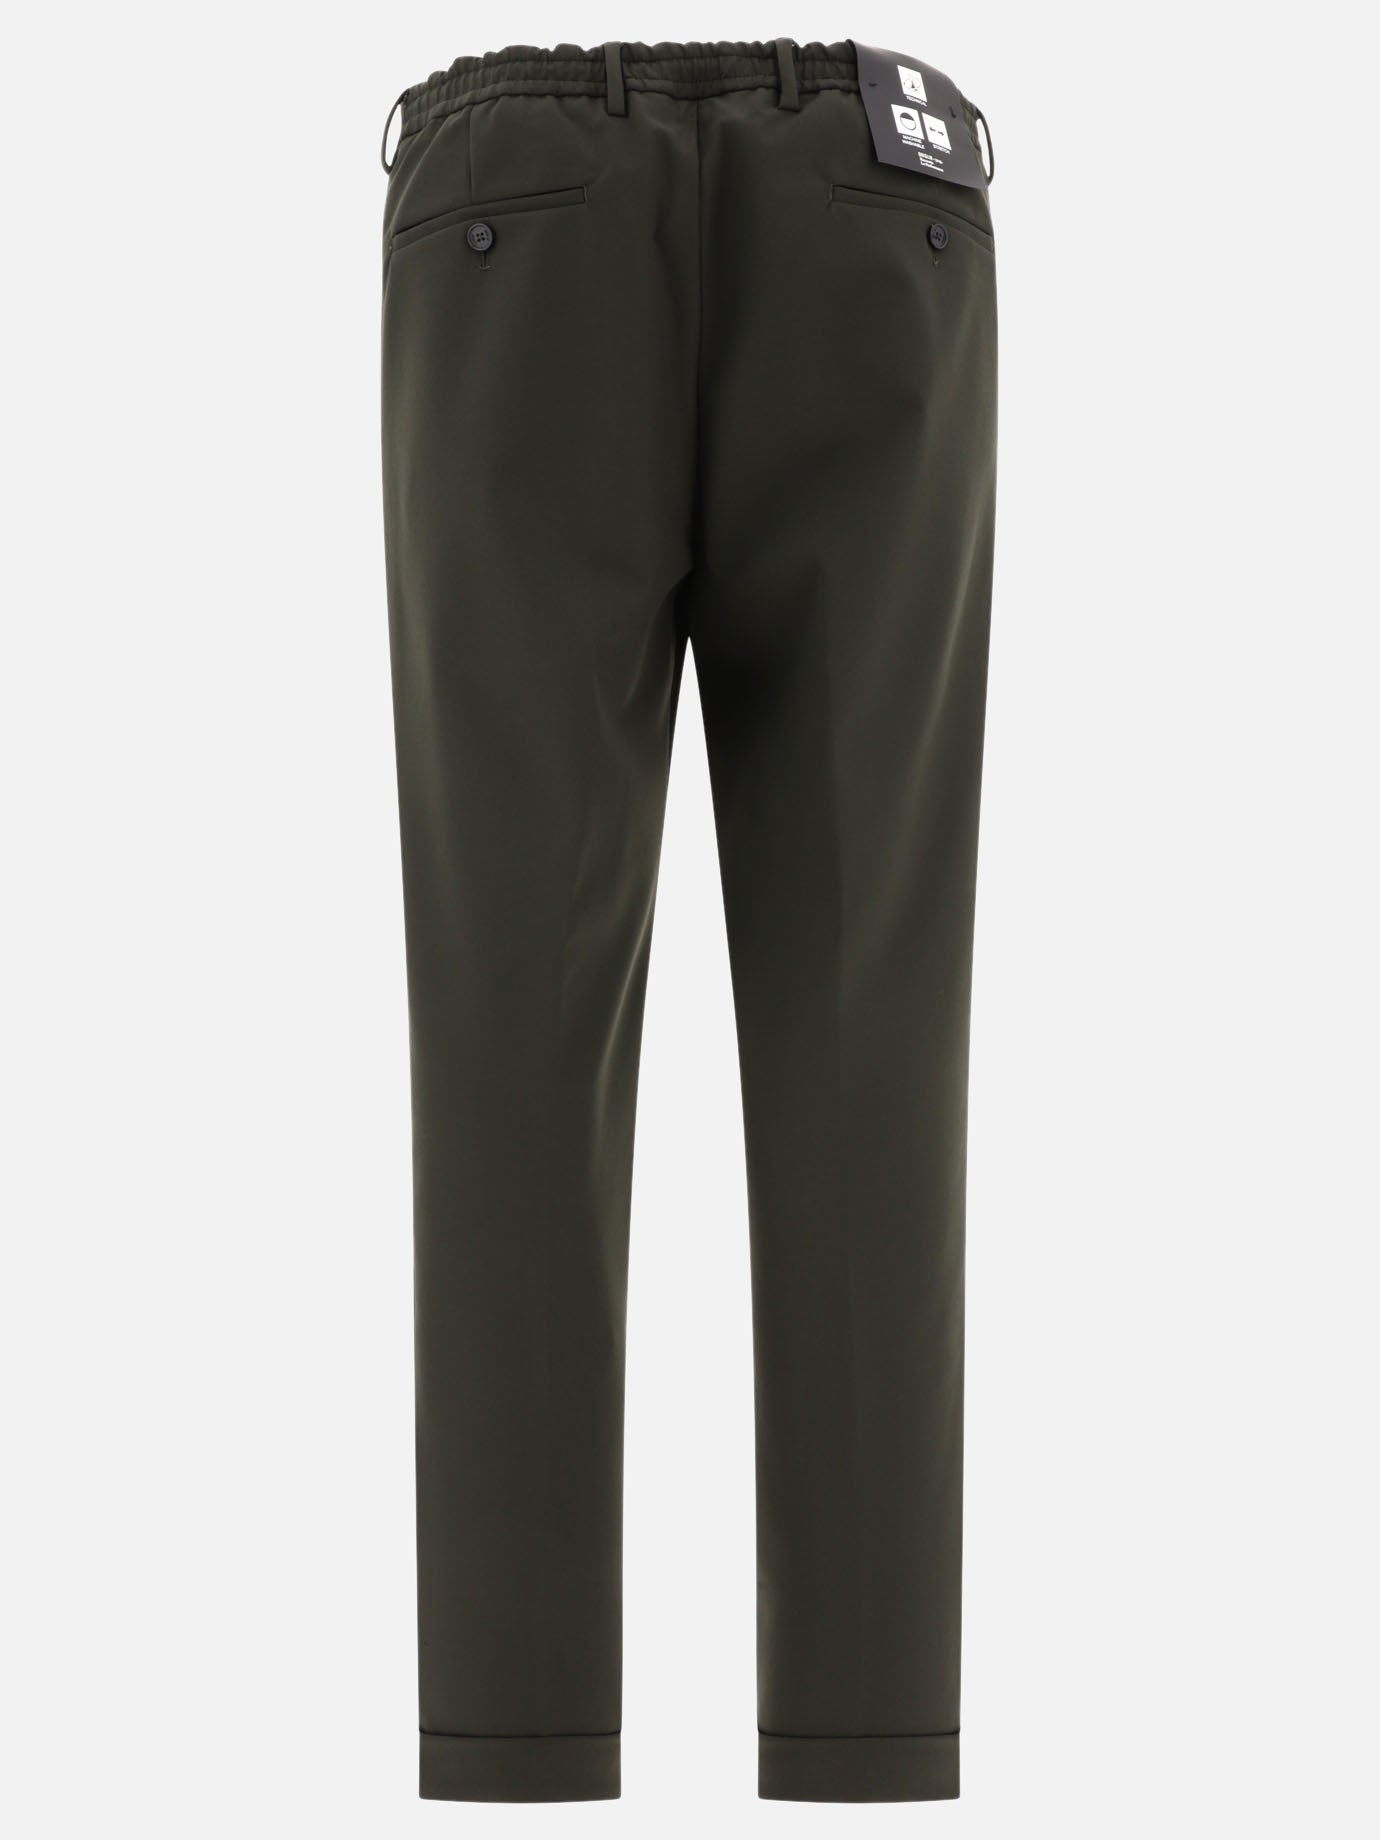 "Montreal Performance" trousers